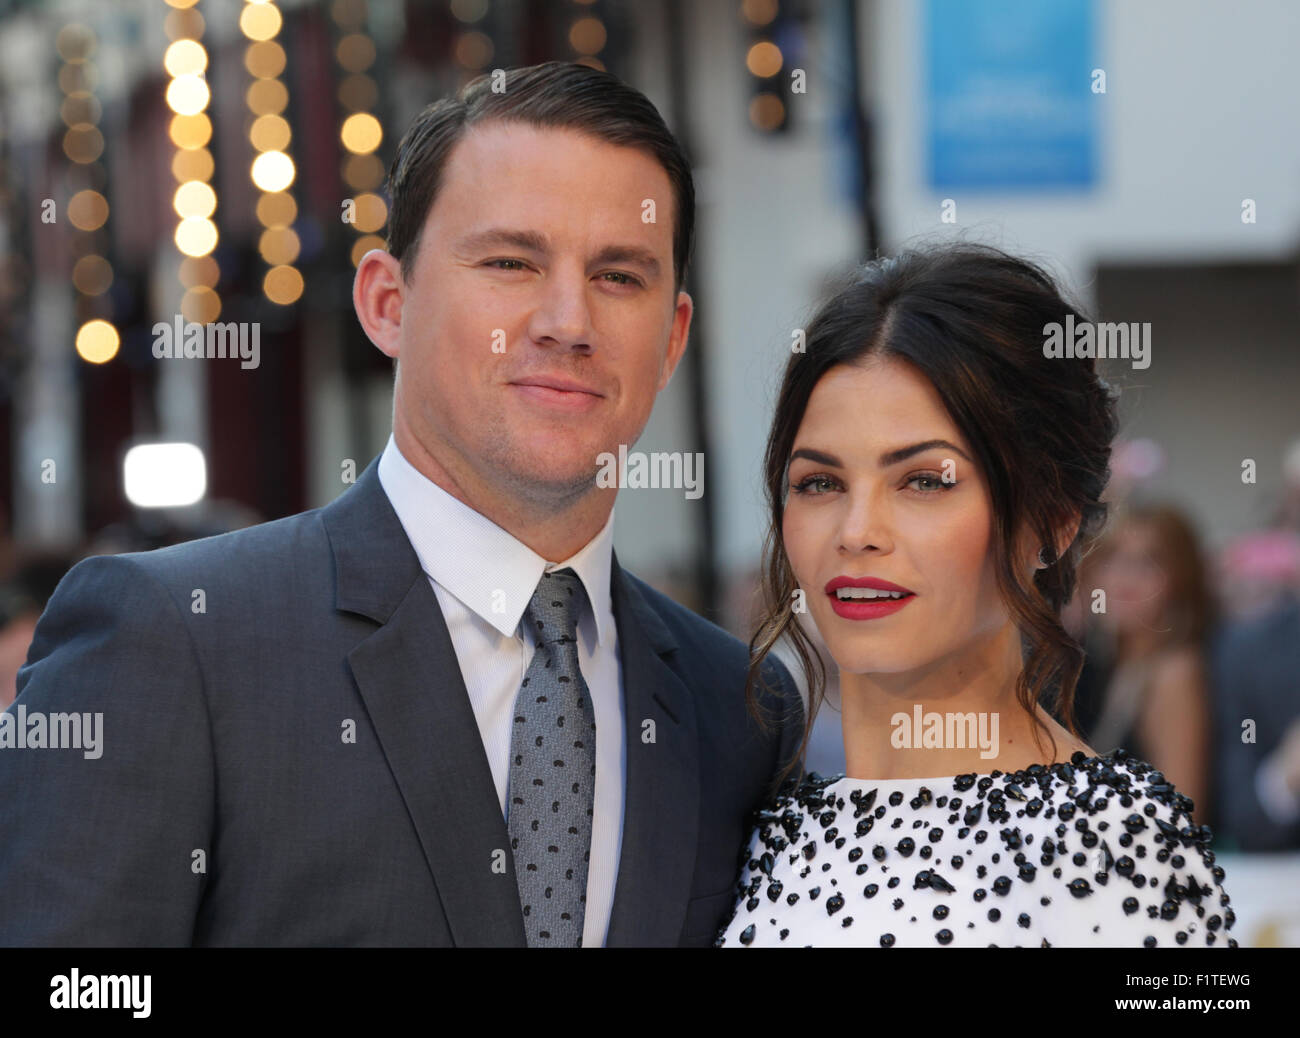 LONDON, UK, 30th June 2015: Channing Tatum and Jenna Dewan attend the Magic Mike: XXL - UK film premiere, Leicester Square in Lo Stock Photo